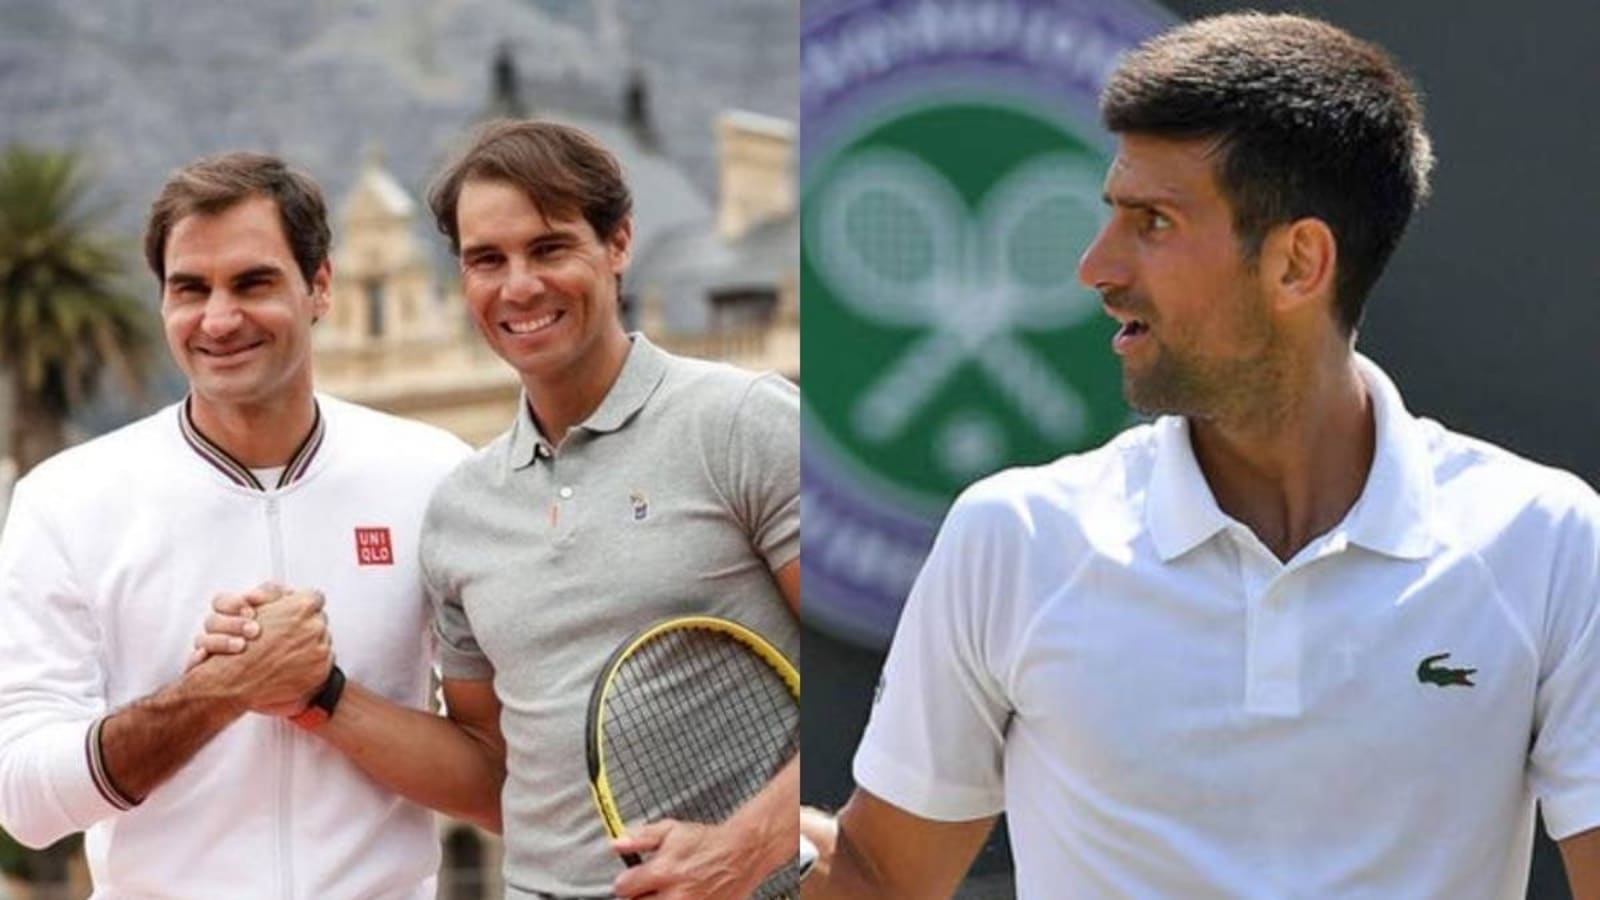 Tennis legend’s big claim on Djokovic’s popularity compared to Federer, Nadal: ‘He’s credit to our game for god’s sakes’